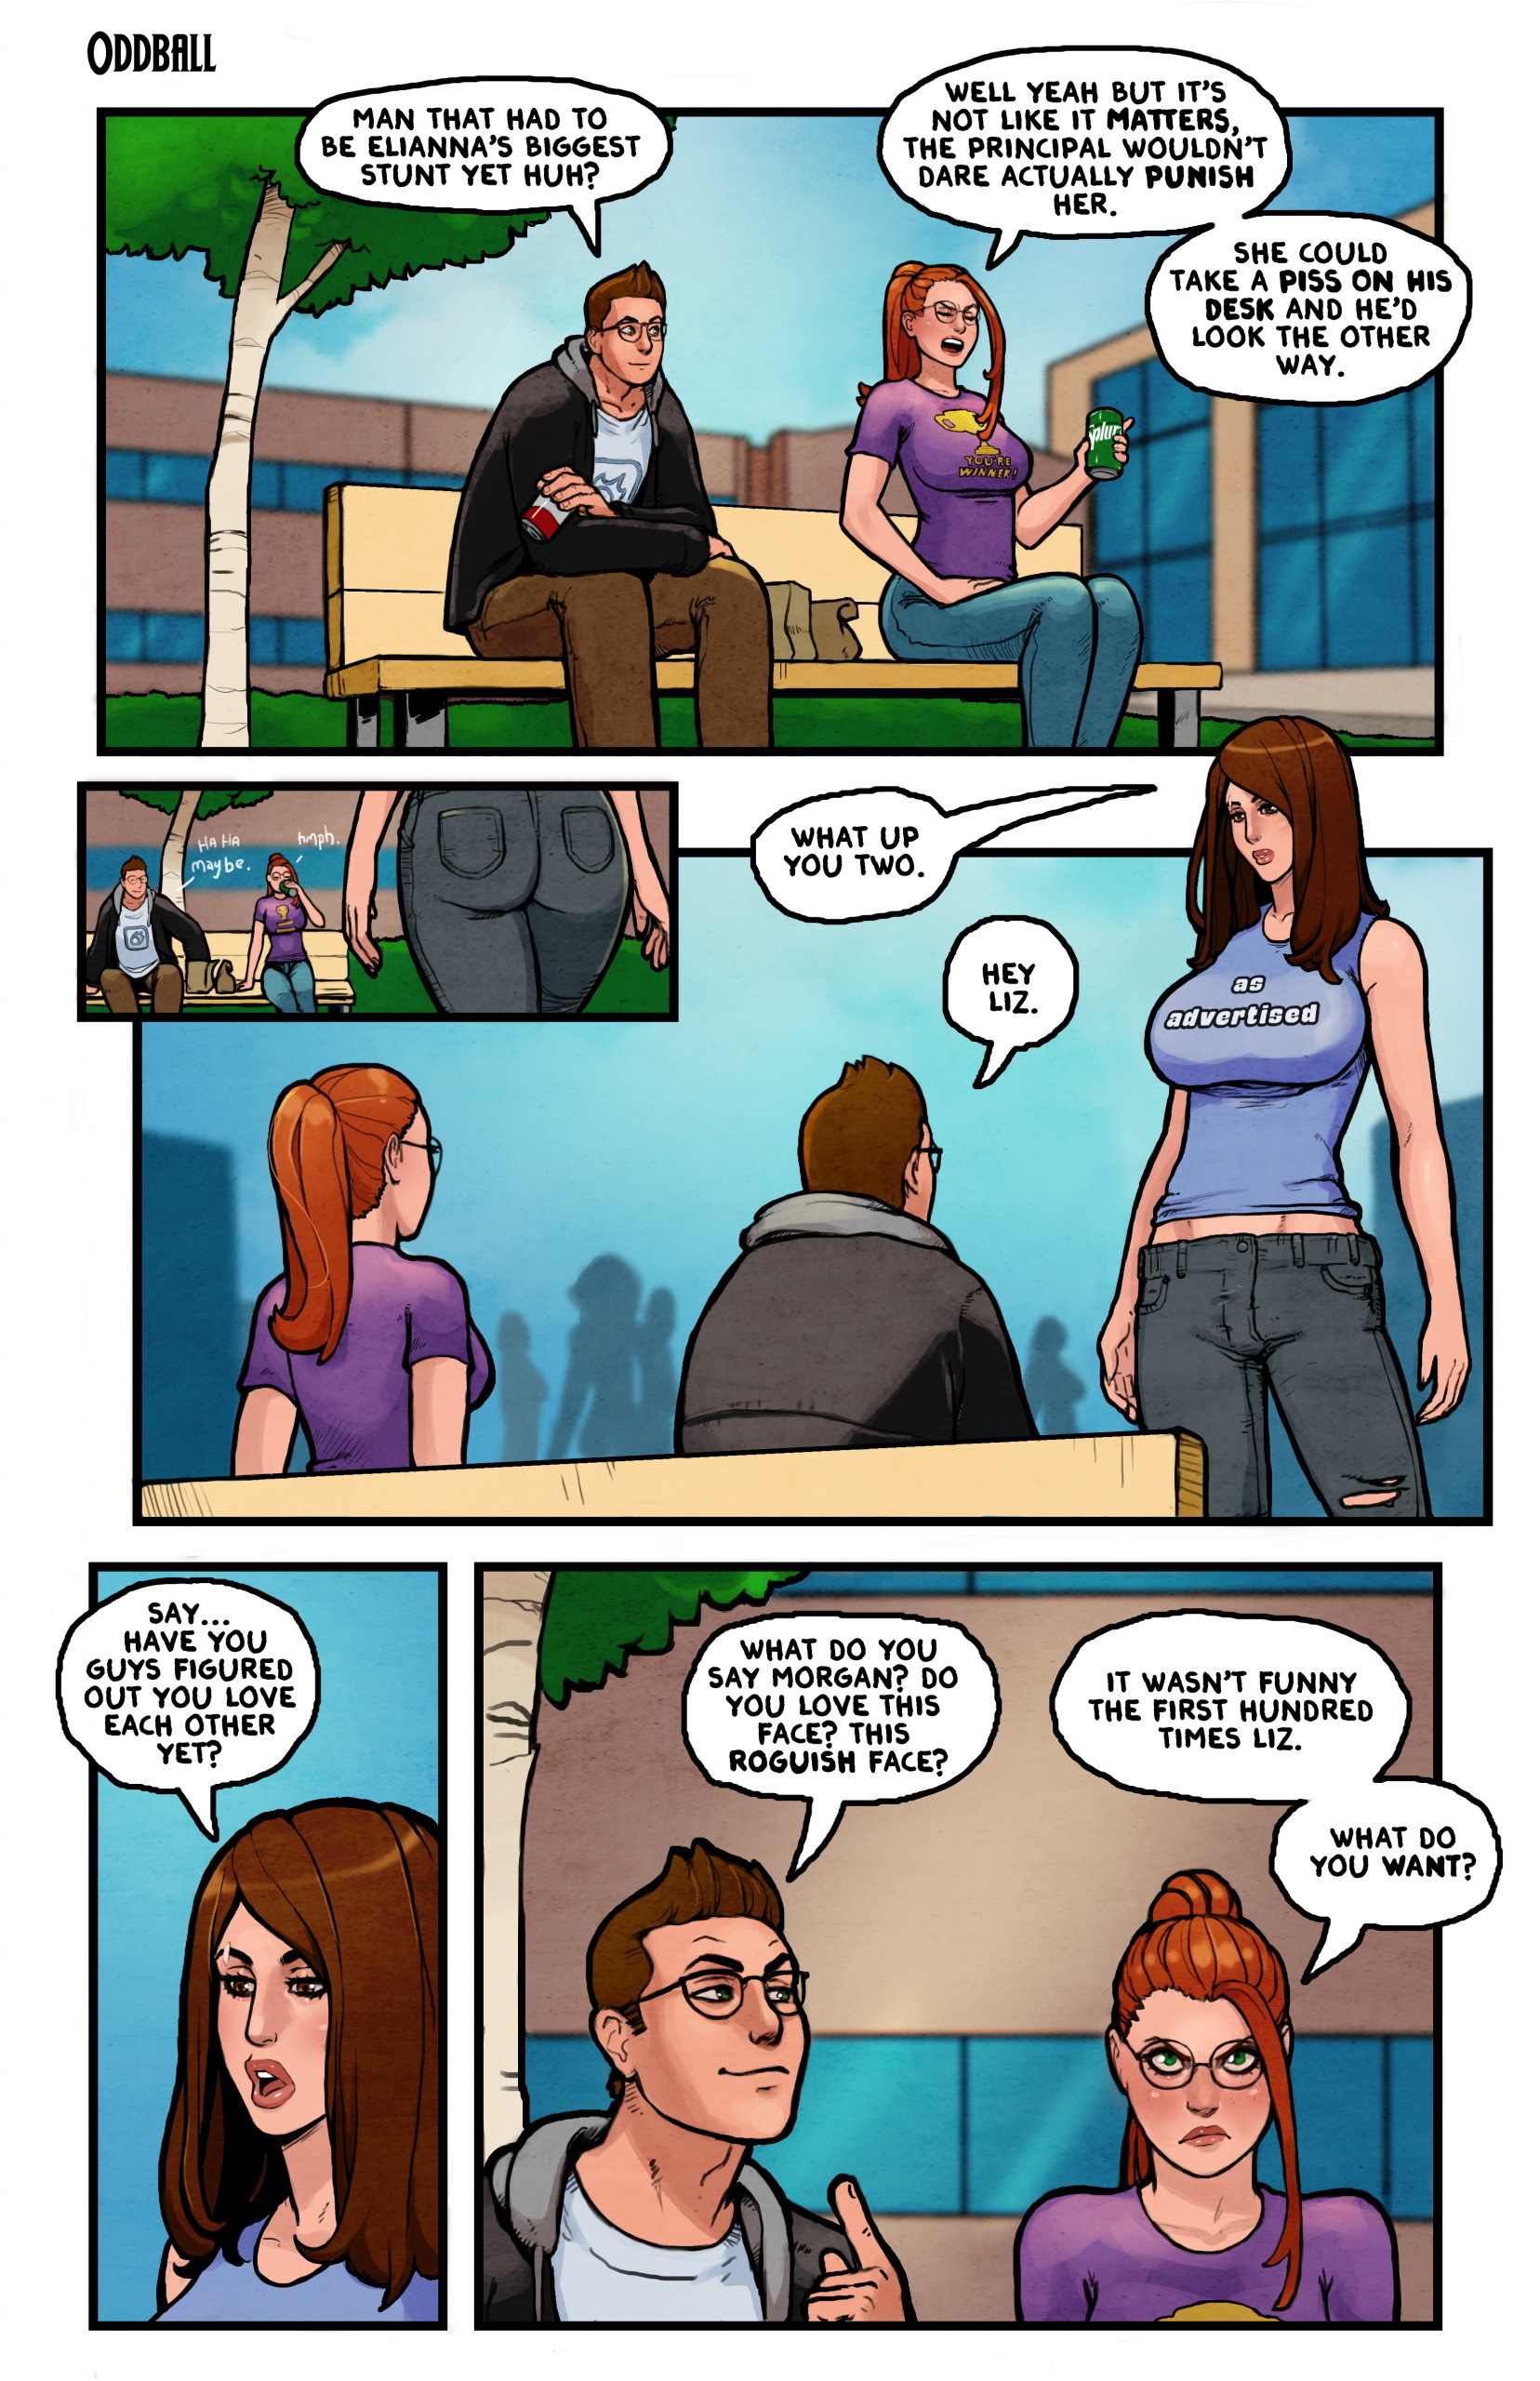 This Romantic World - Page 4